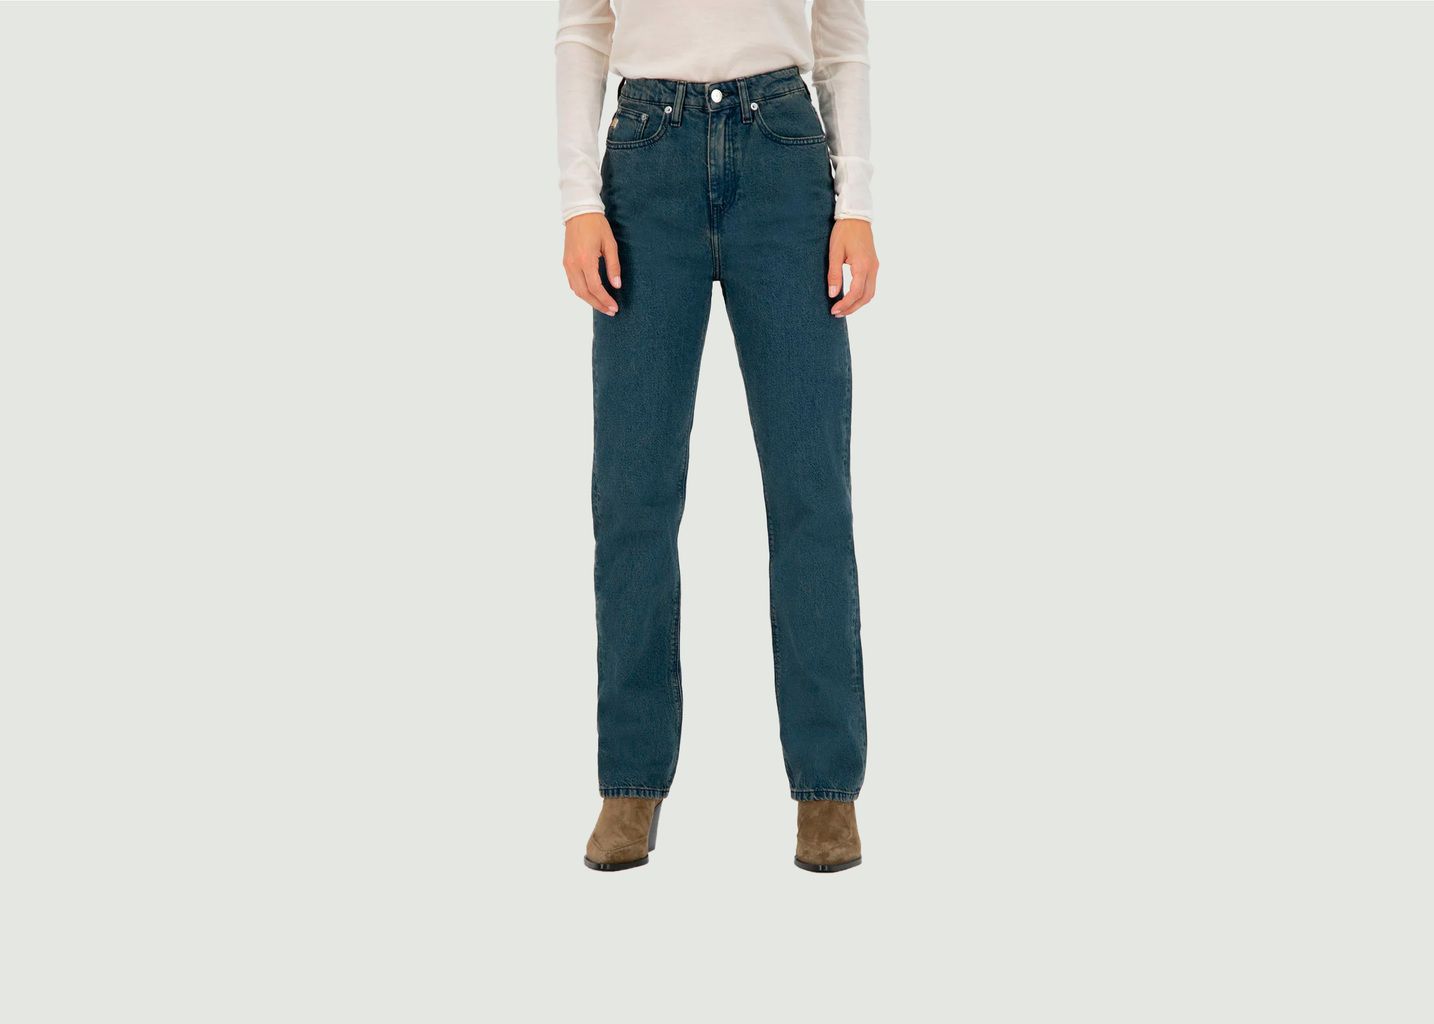 Jeans Relax Rose - Mud Jeans